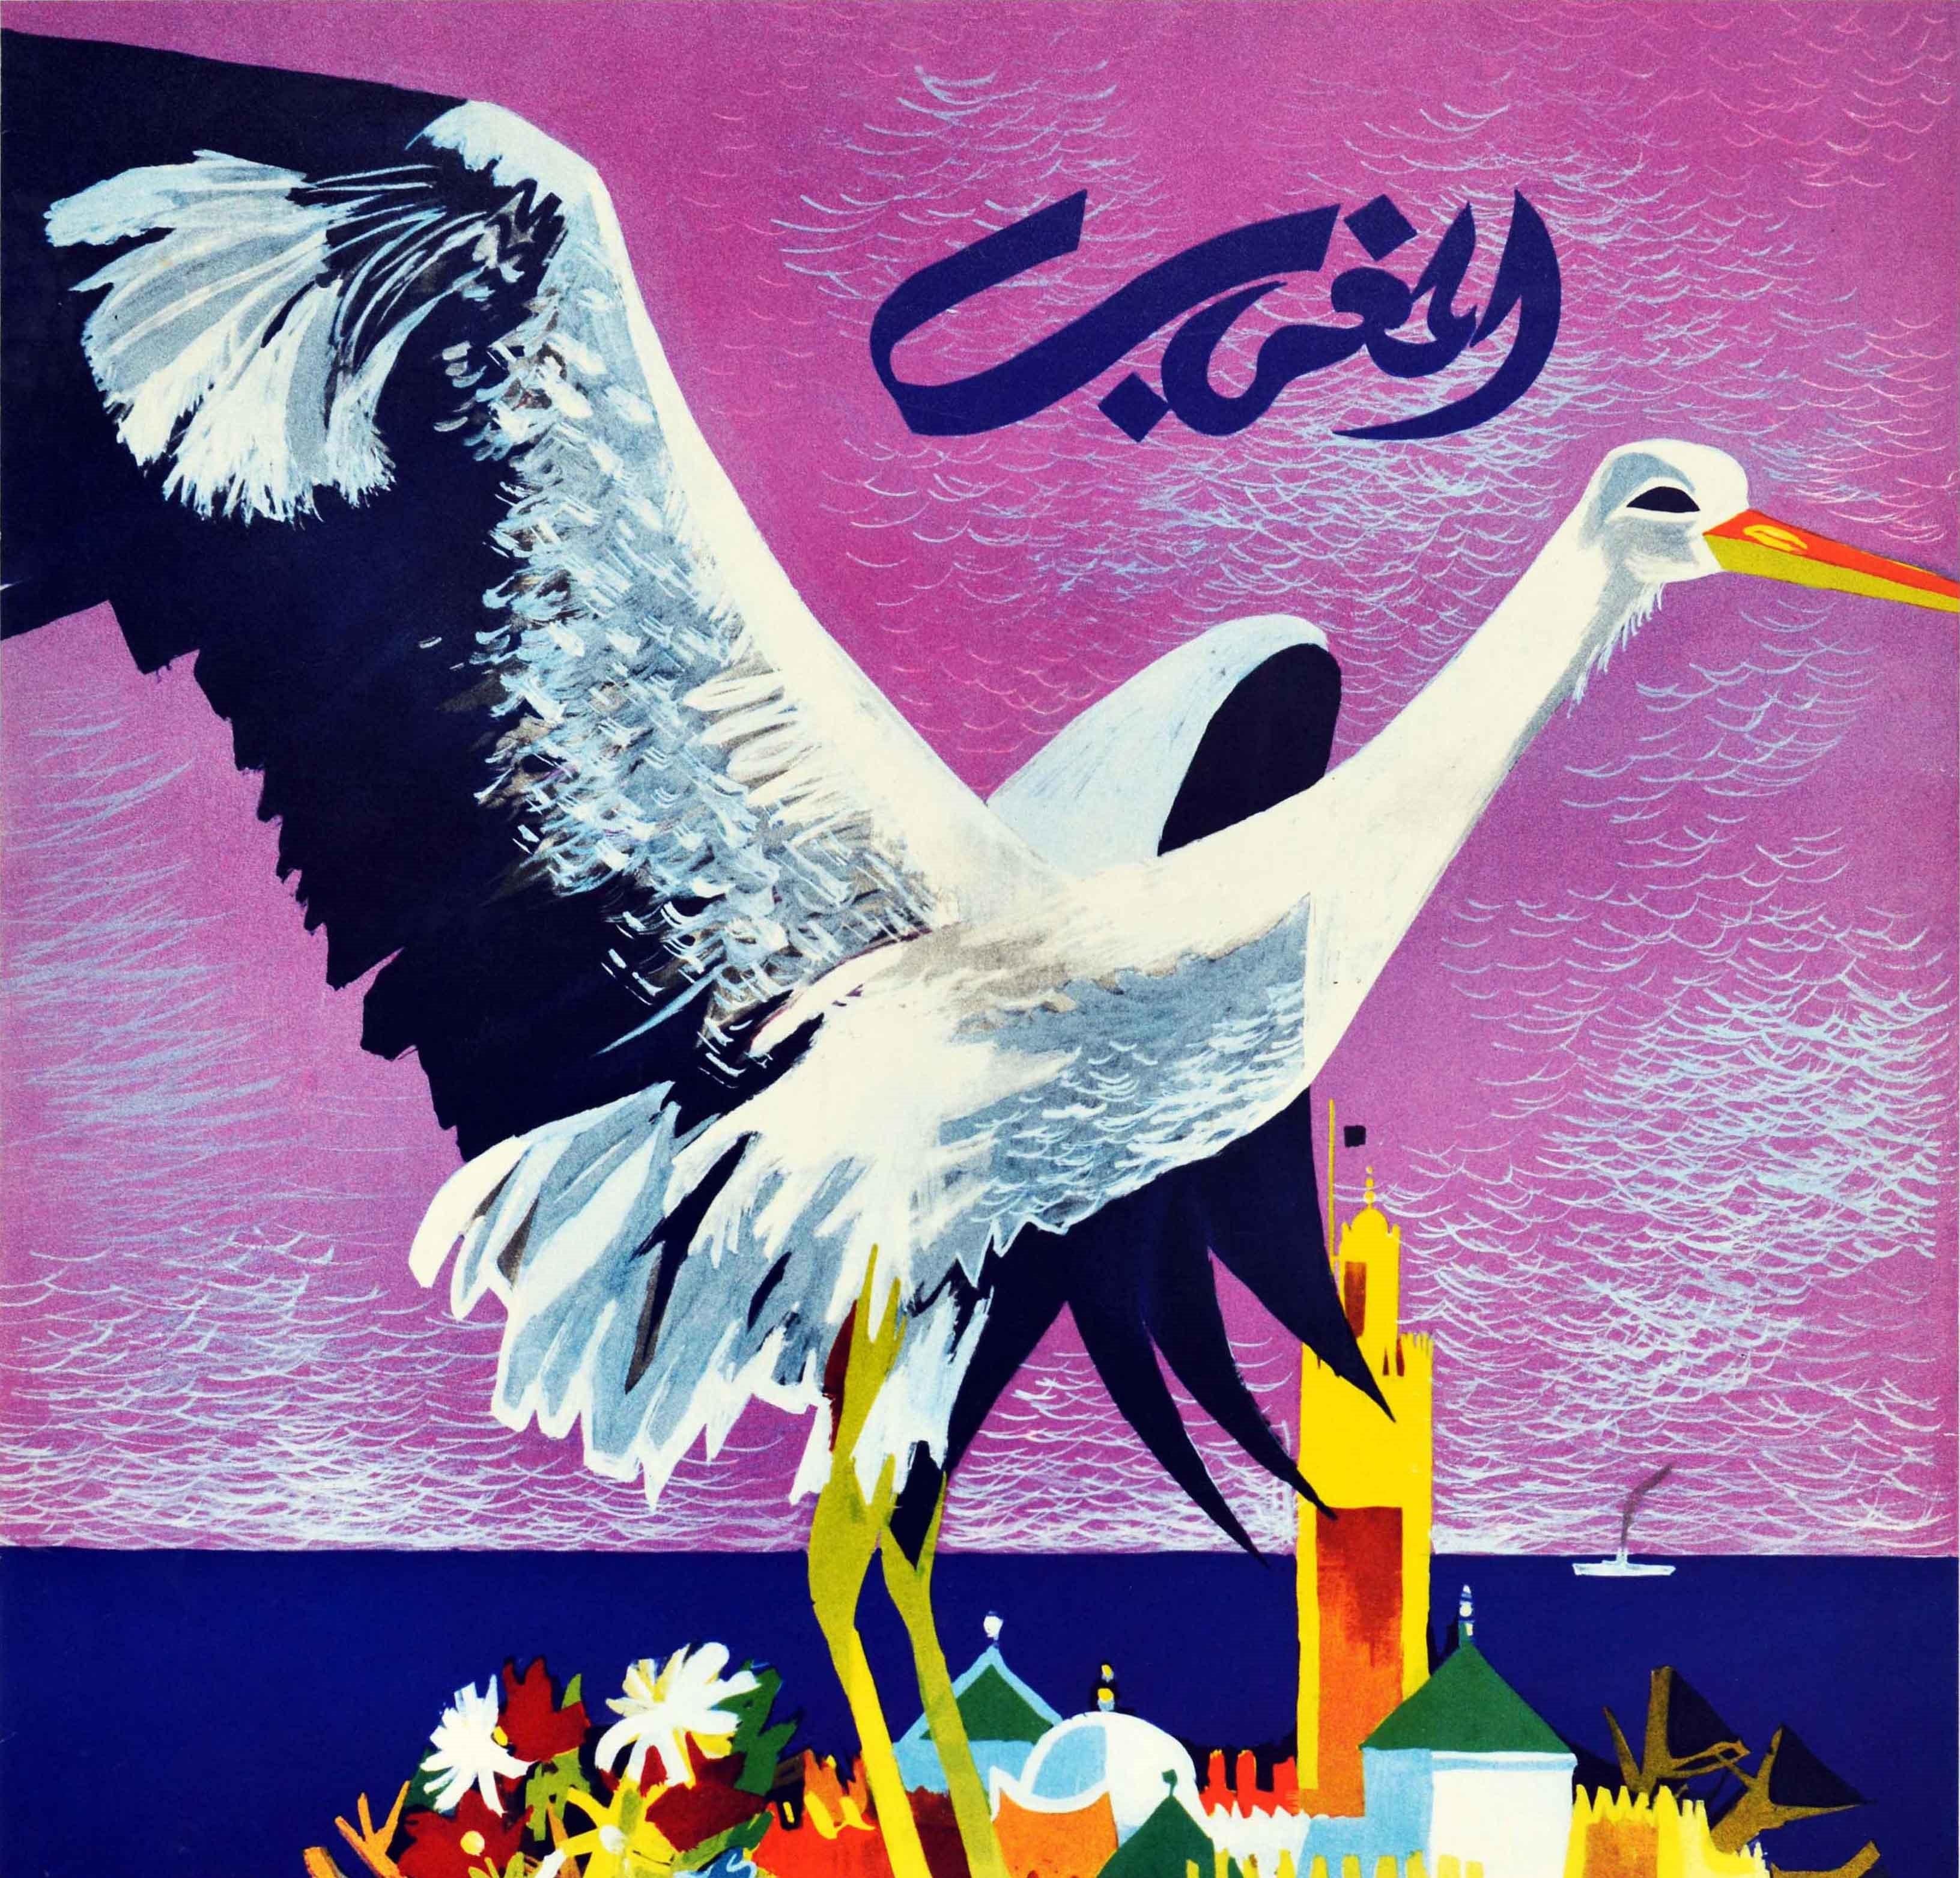 Original vintage travel poster for Maroc / Morocco featuring a colourful design by the French artist Henri Delval (1901-1959) depicting a white stork on a bird nest of twigs and wild flowers with buildings in a walled Moroccan city and a ship